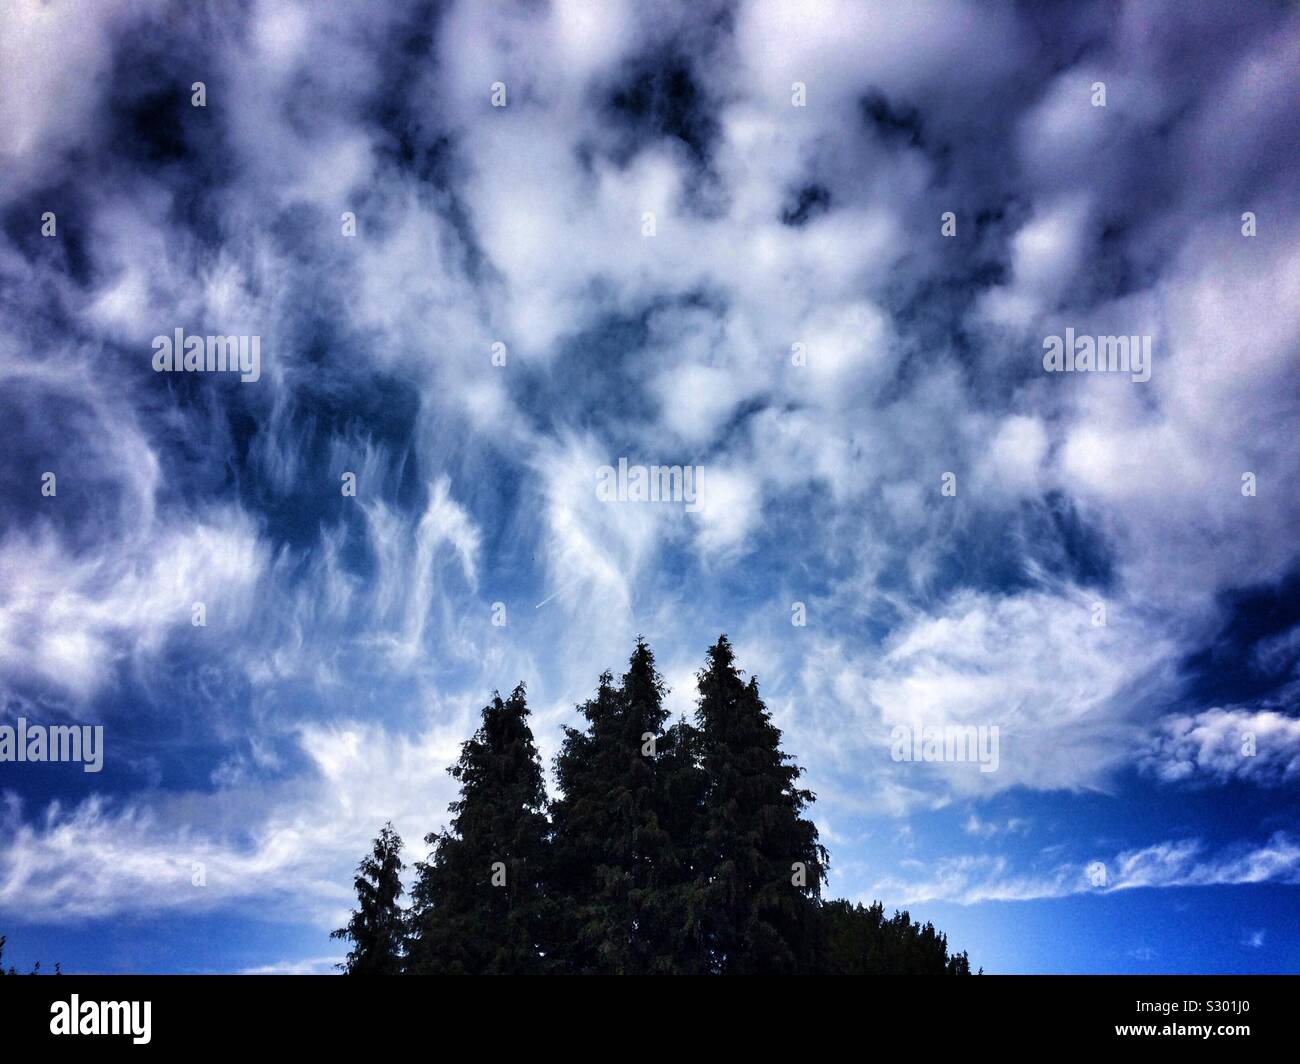 Dramatic blue sky with white fluffy clouds and sinister dark pointed conifer trees silhouetted below Stock Photo